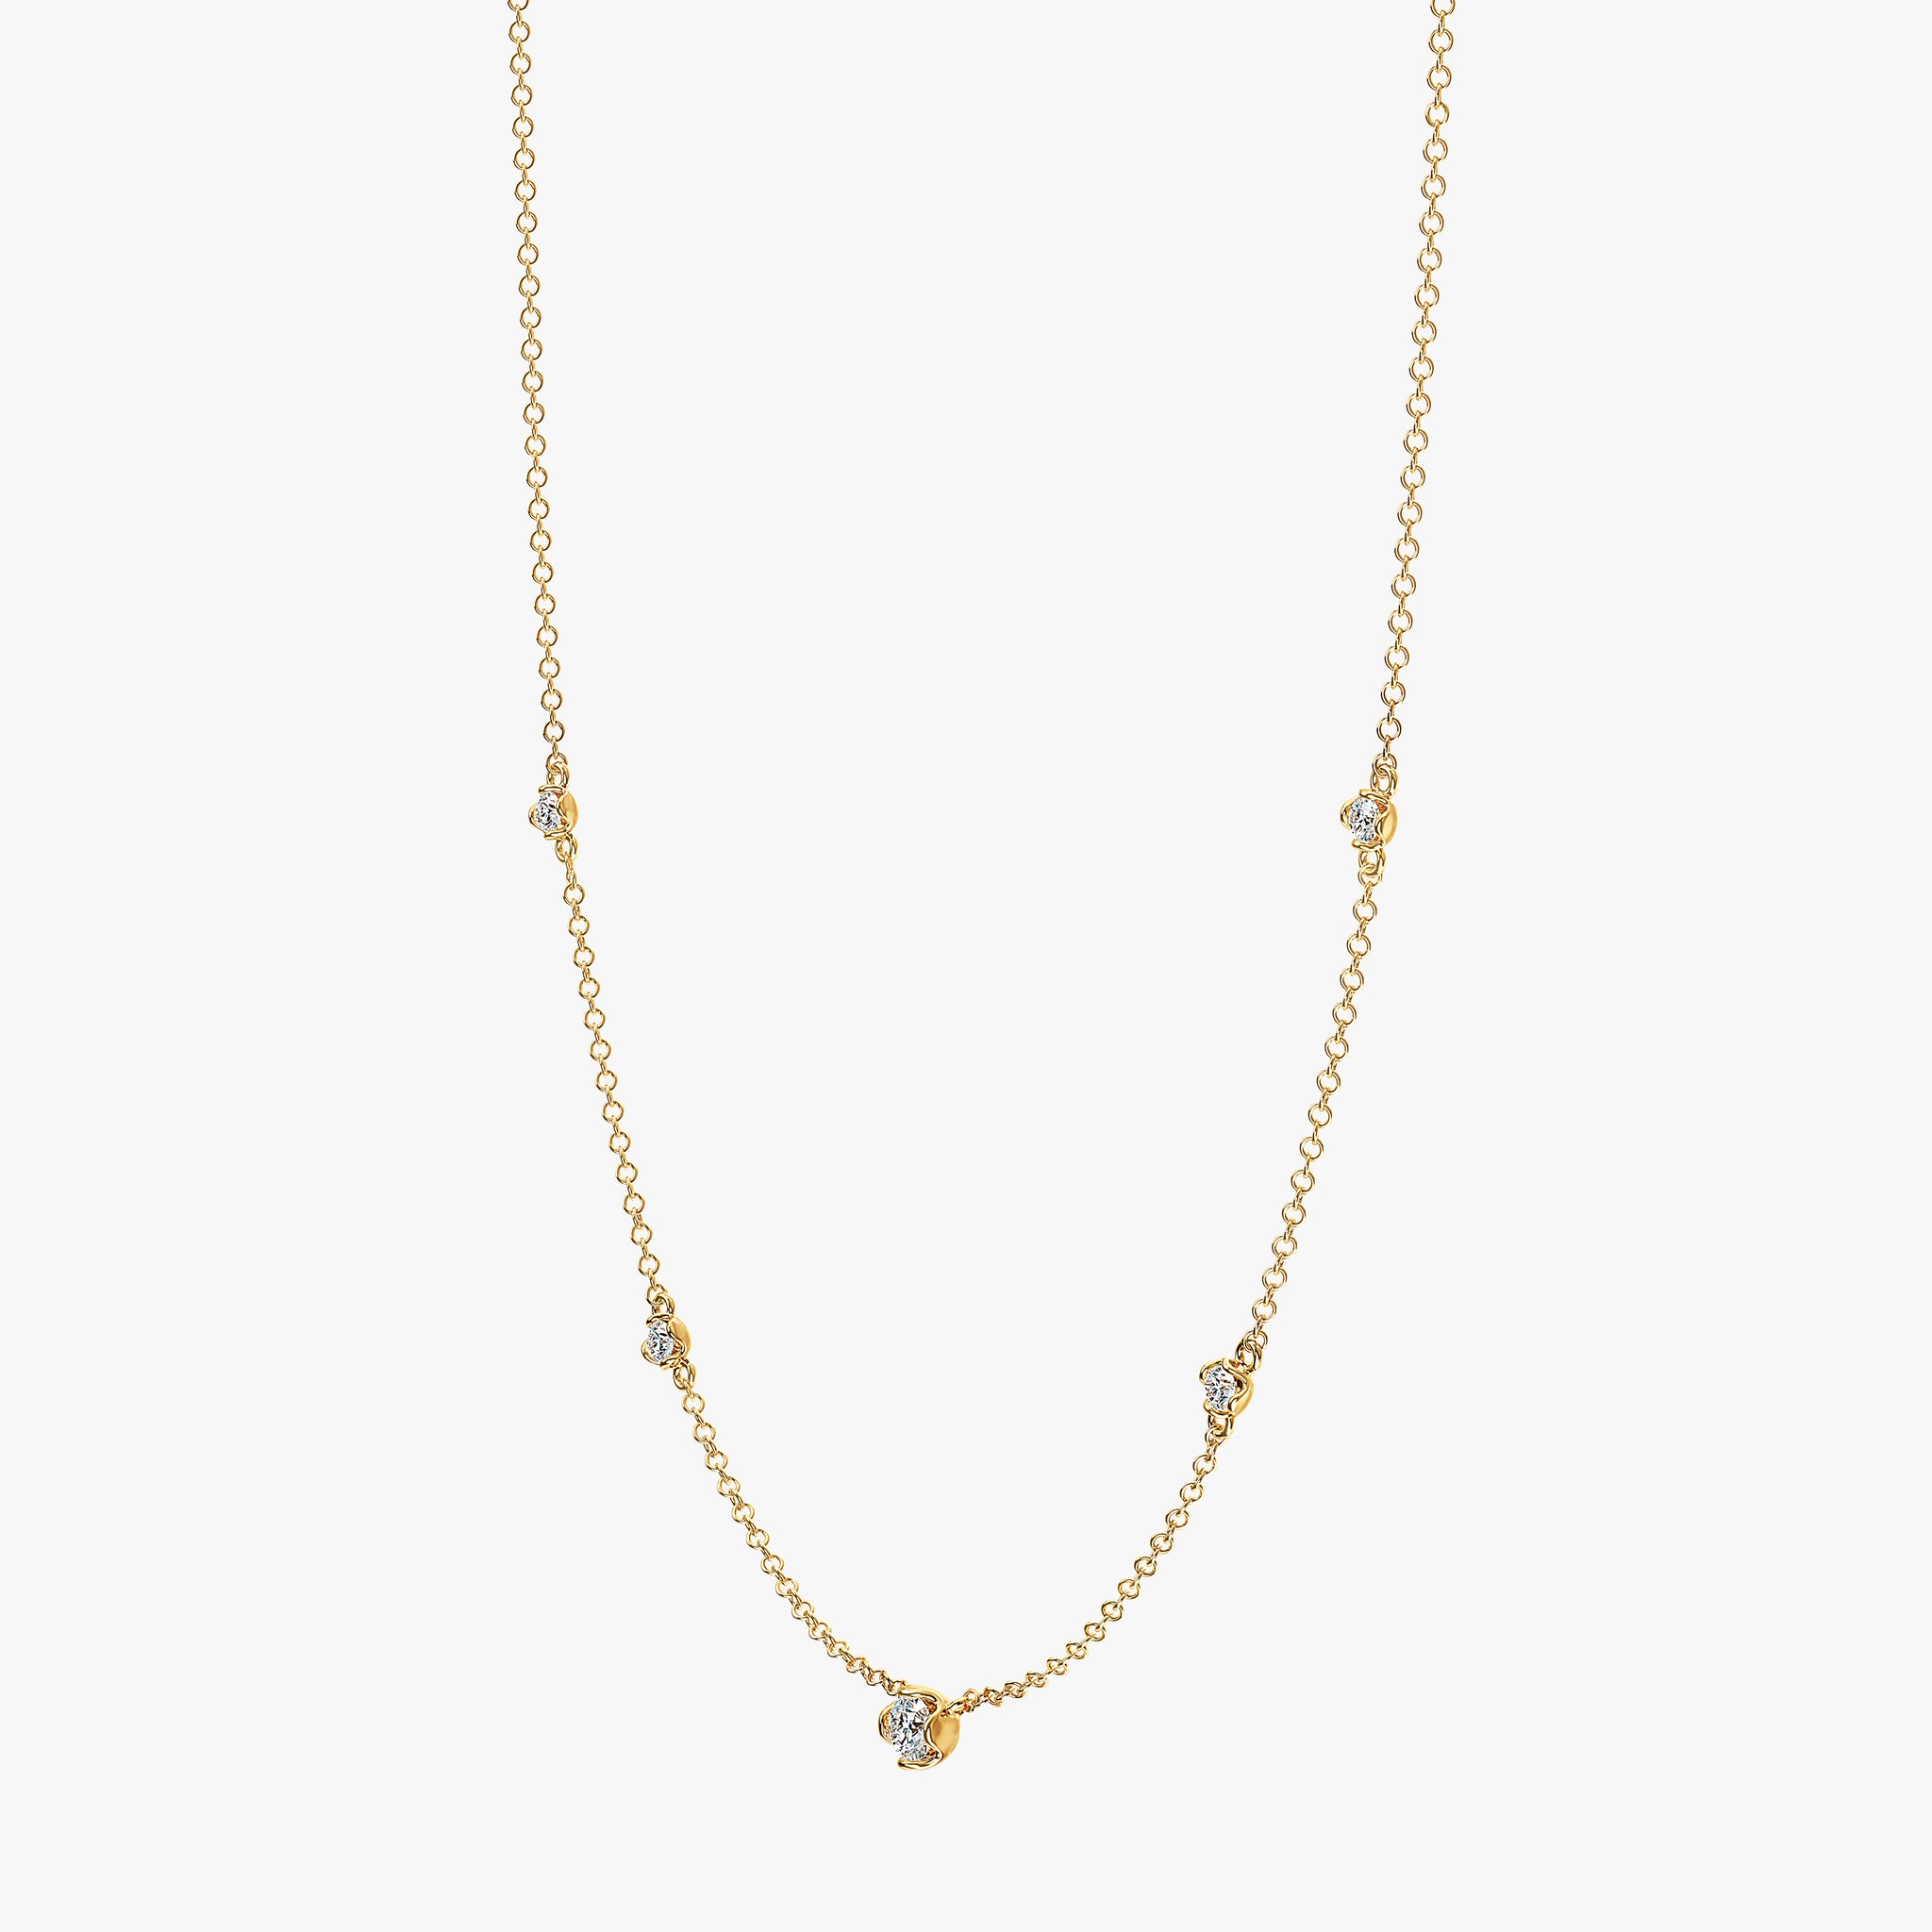 J'EVAR 14KT Yellow Gold By The Yard ALTR Lab Grown Diamond Necklace Perspective View